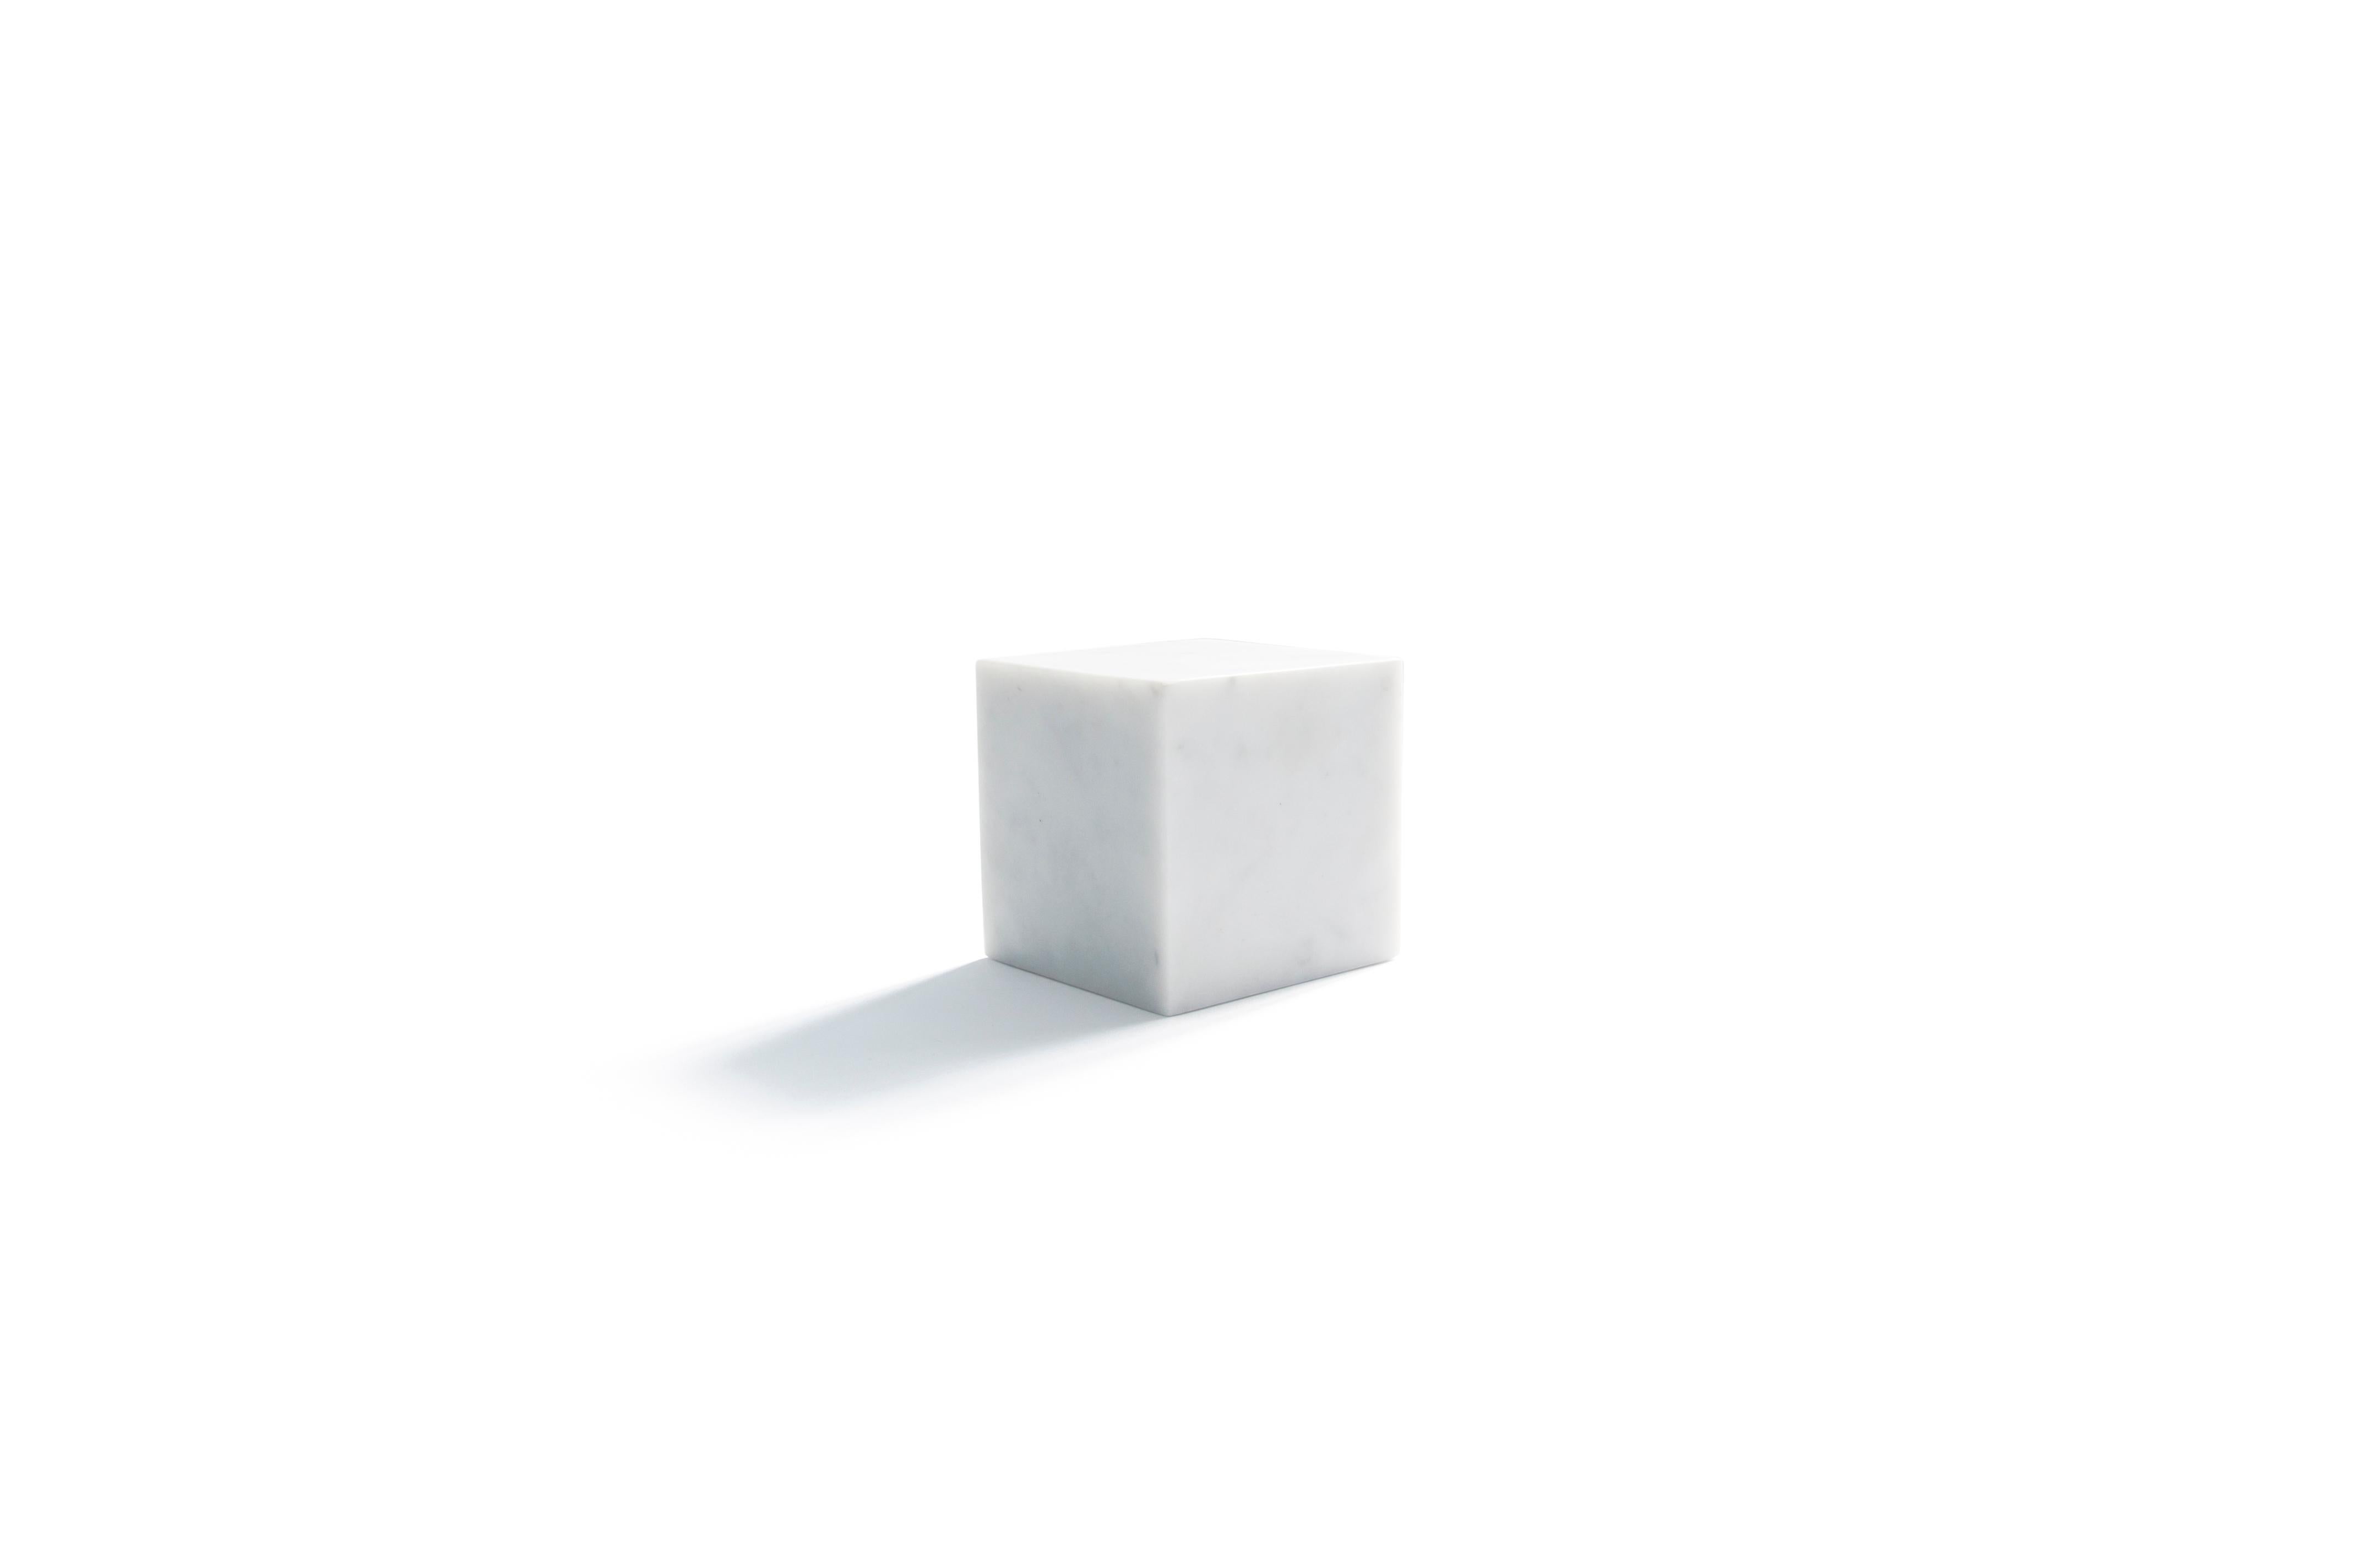 Small decorative paperweight cube full in white Carrara marble. Each piece is in a way unique (every marble block is different in veins and shades) and handmade by Italian artisans specialized over generations in processing marble. Slight variations